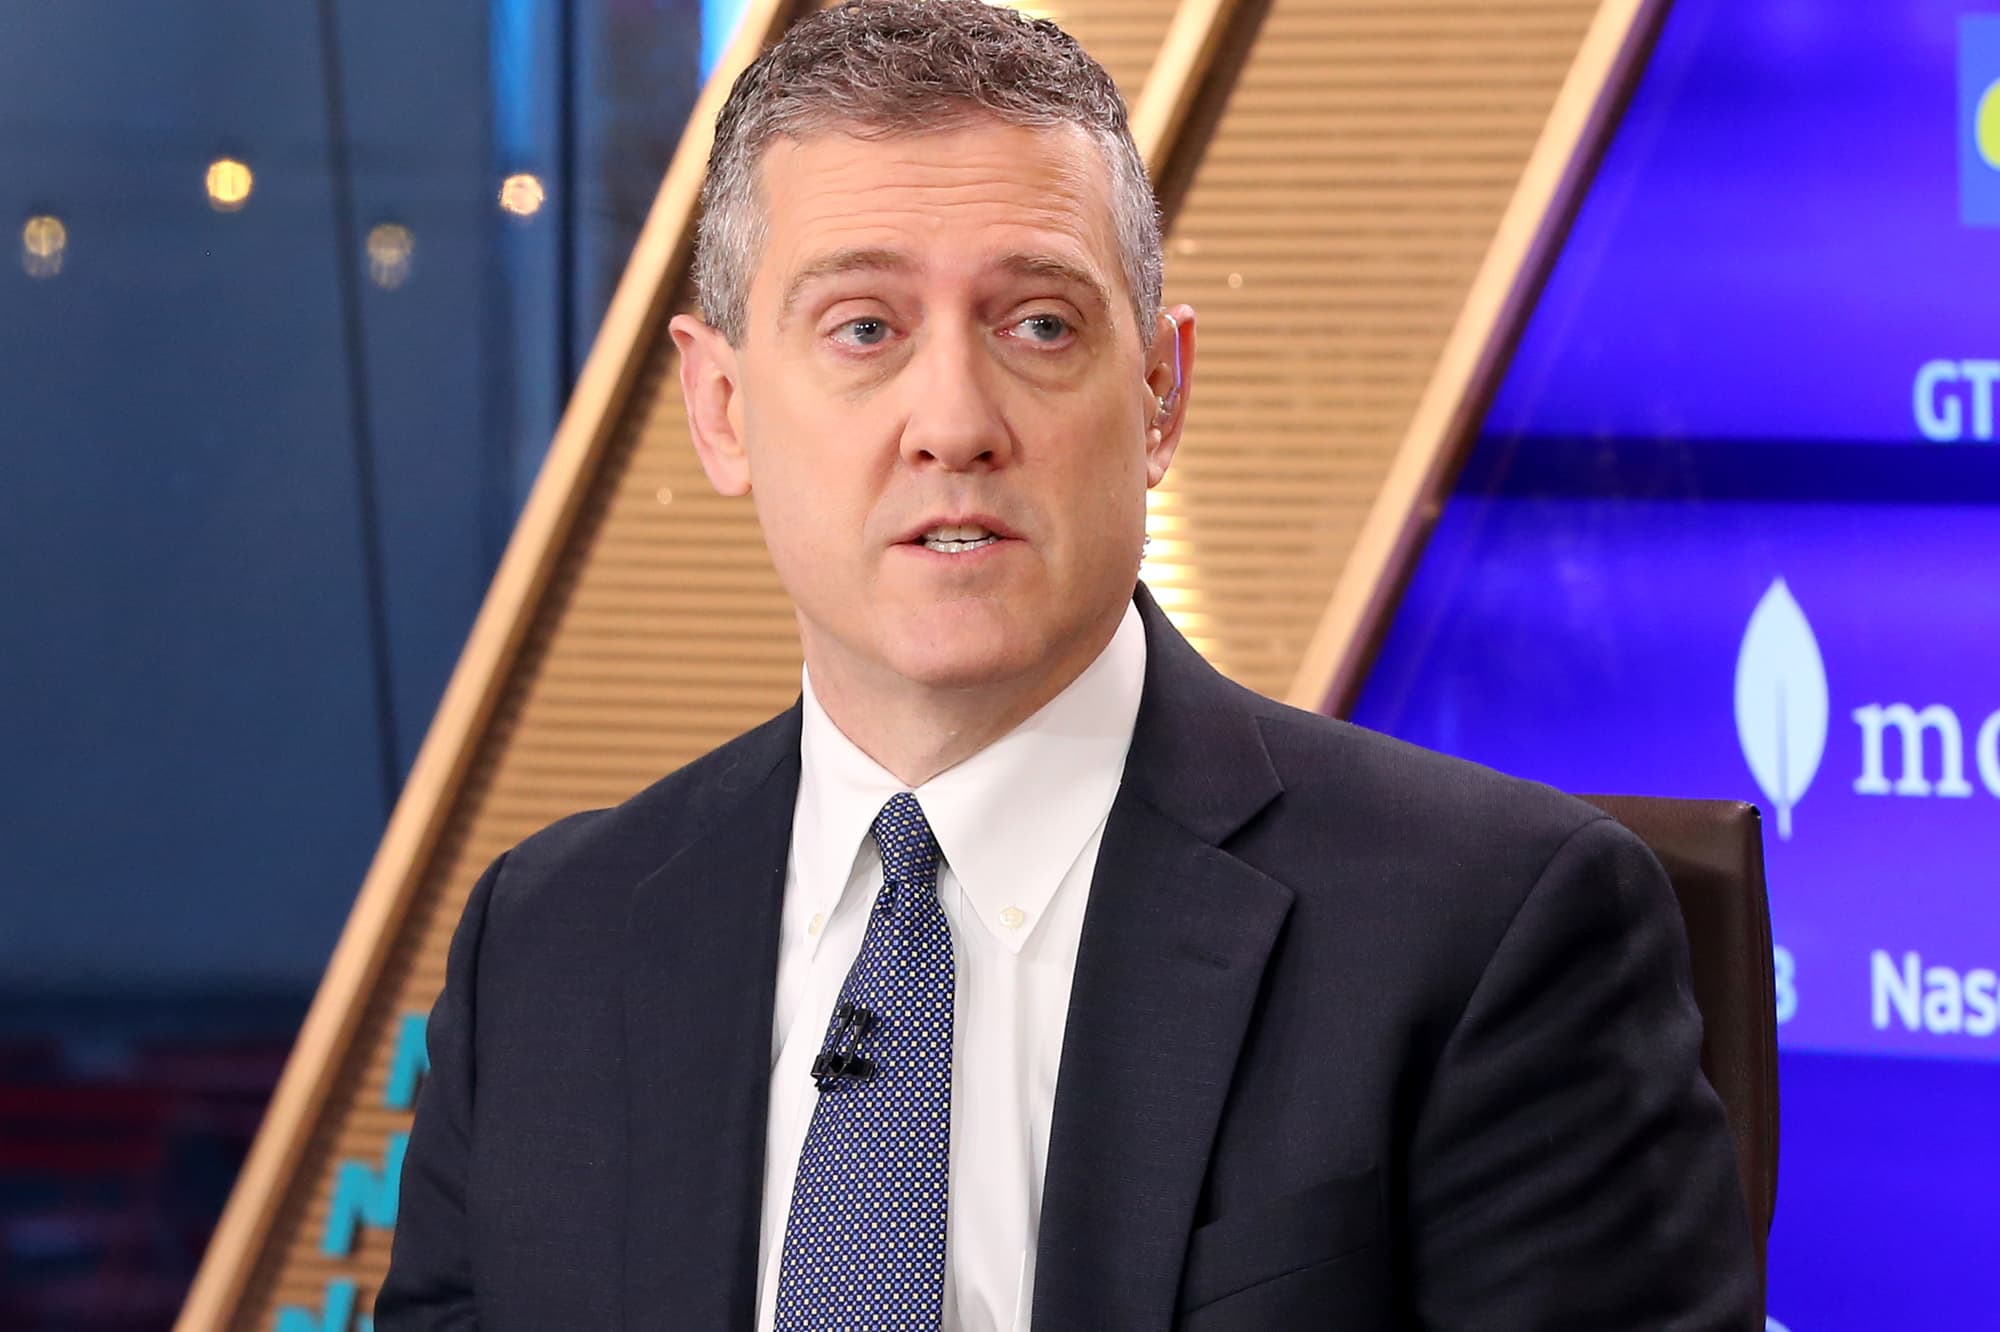 Fed's Bullard says the central bank's 'credibility is on the line,' needs to 'front-load' rate hikes